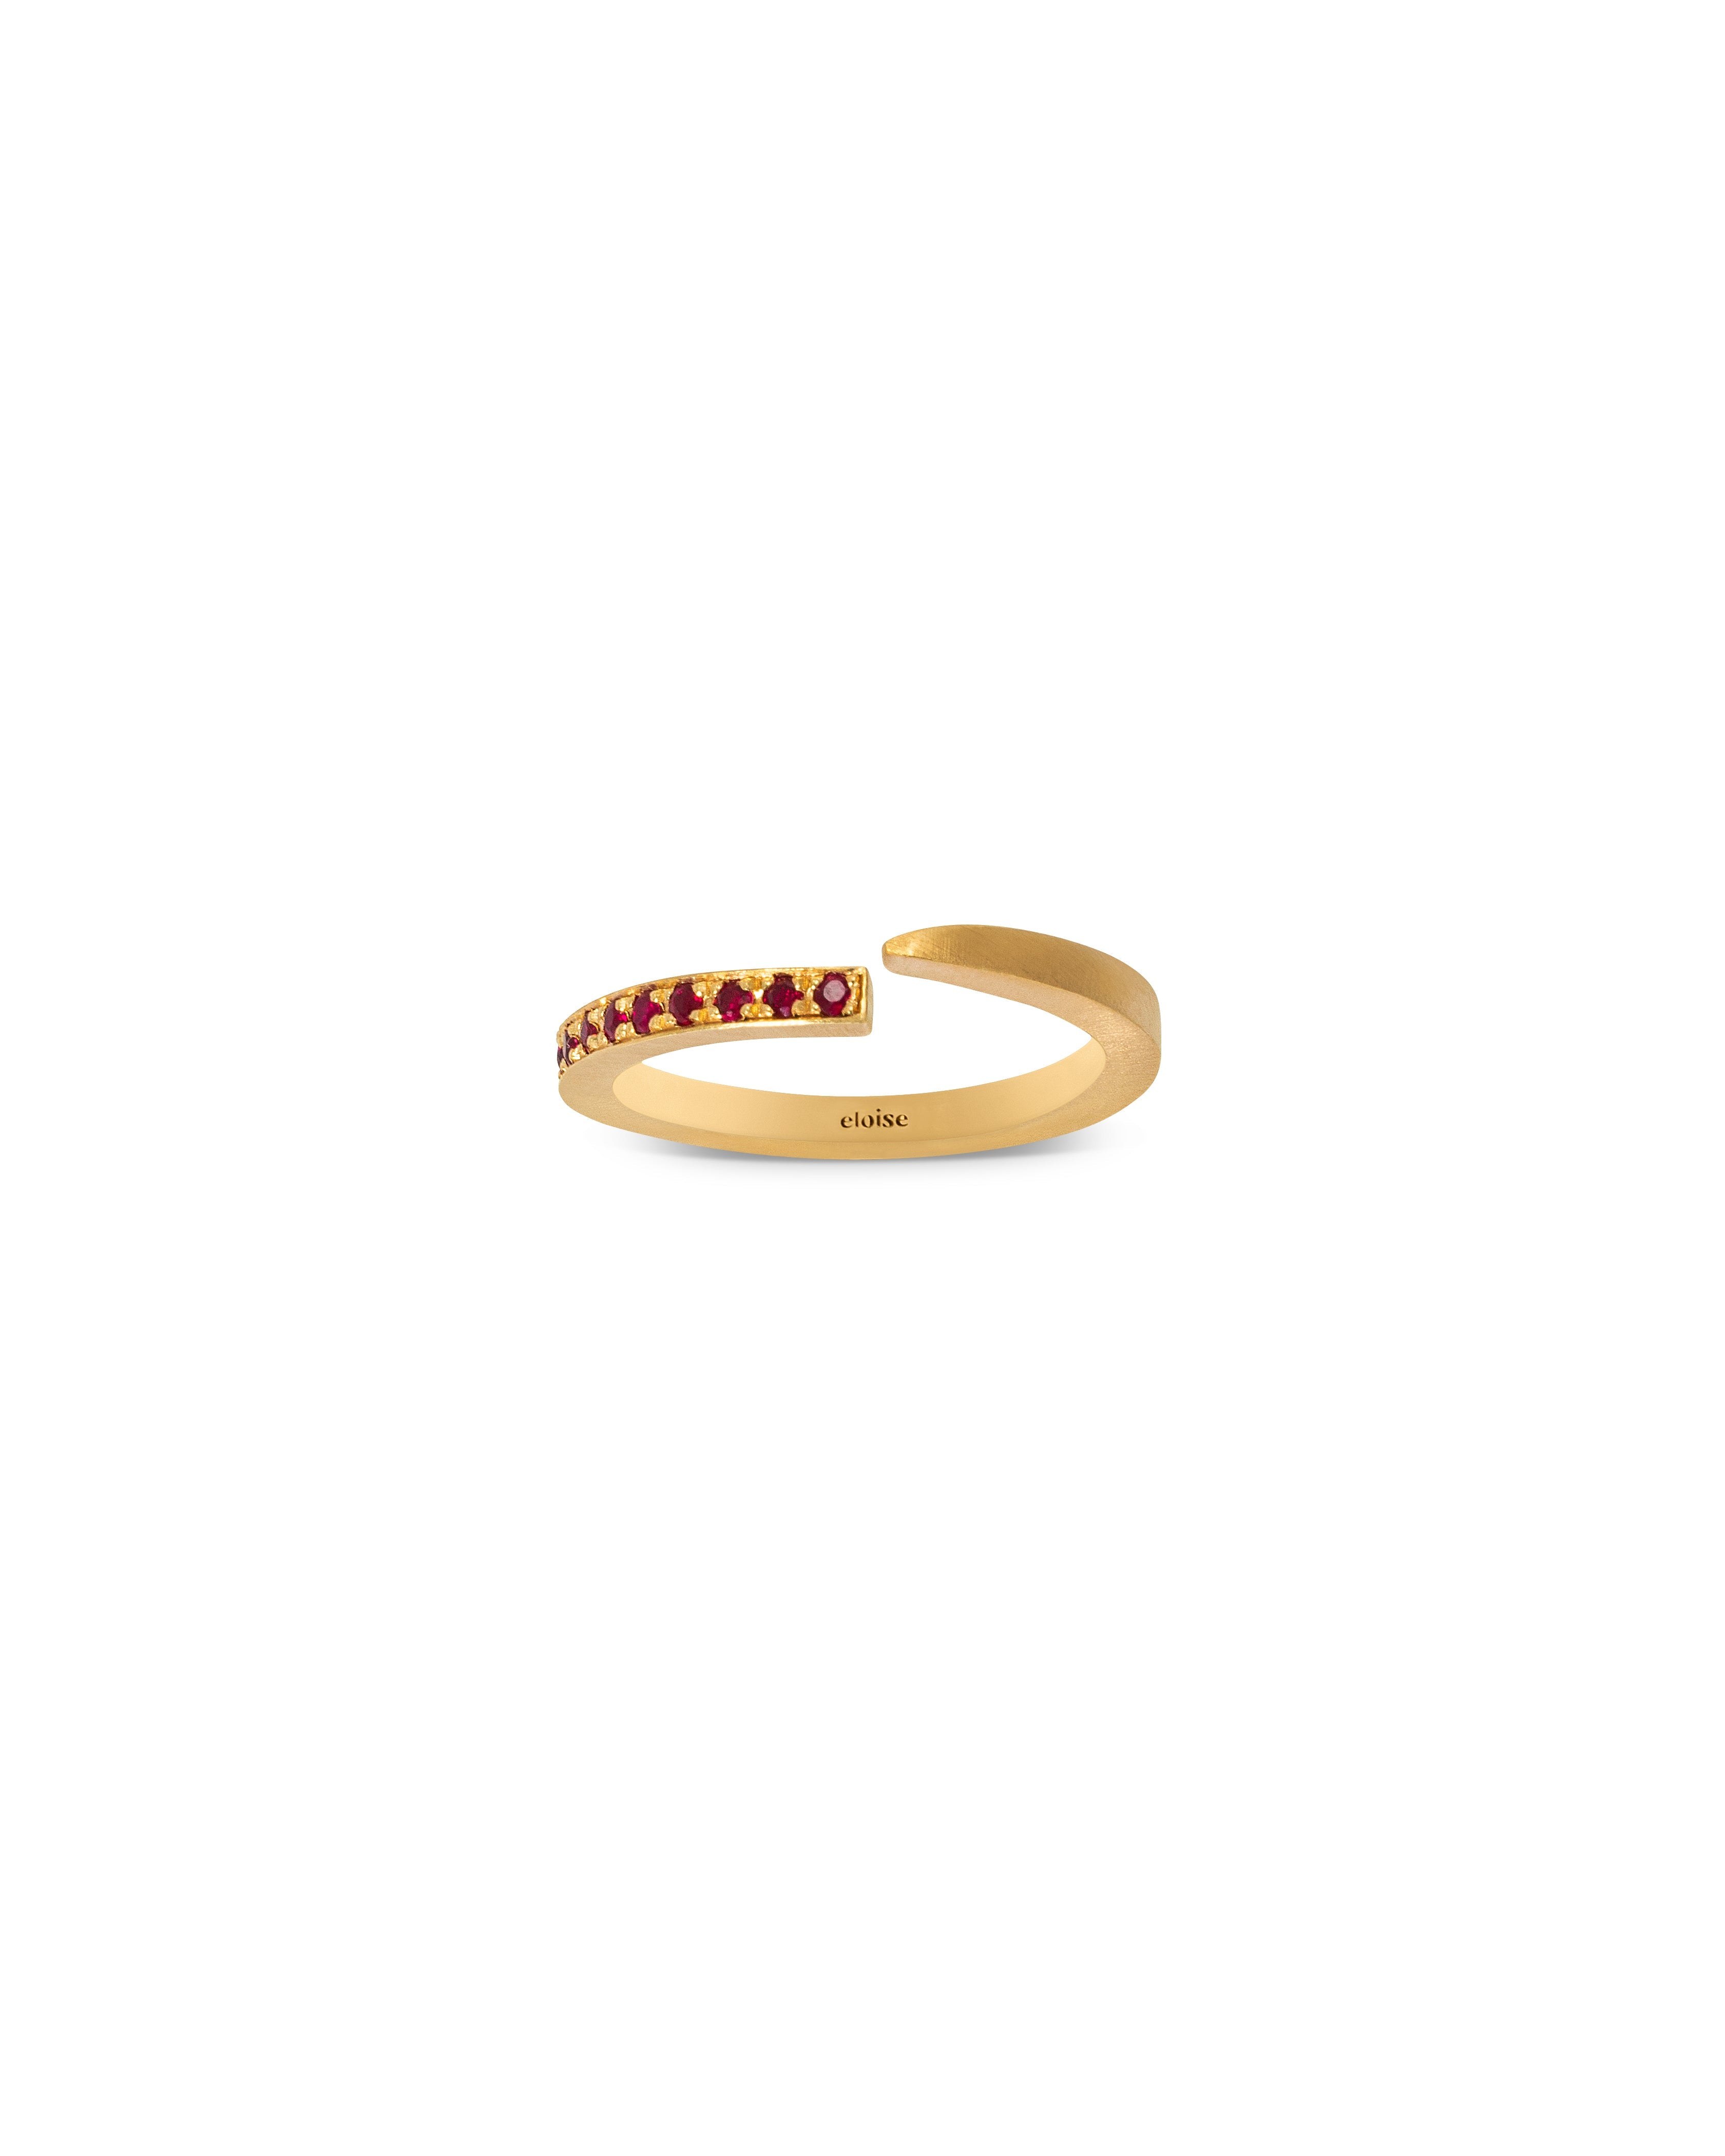 Women’s Red Crescent Moon Ring Ruby Eloise Jewelry